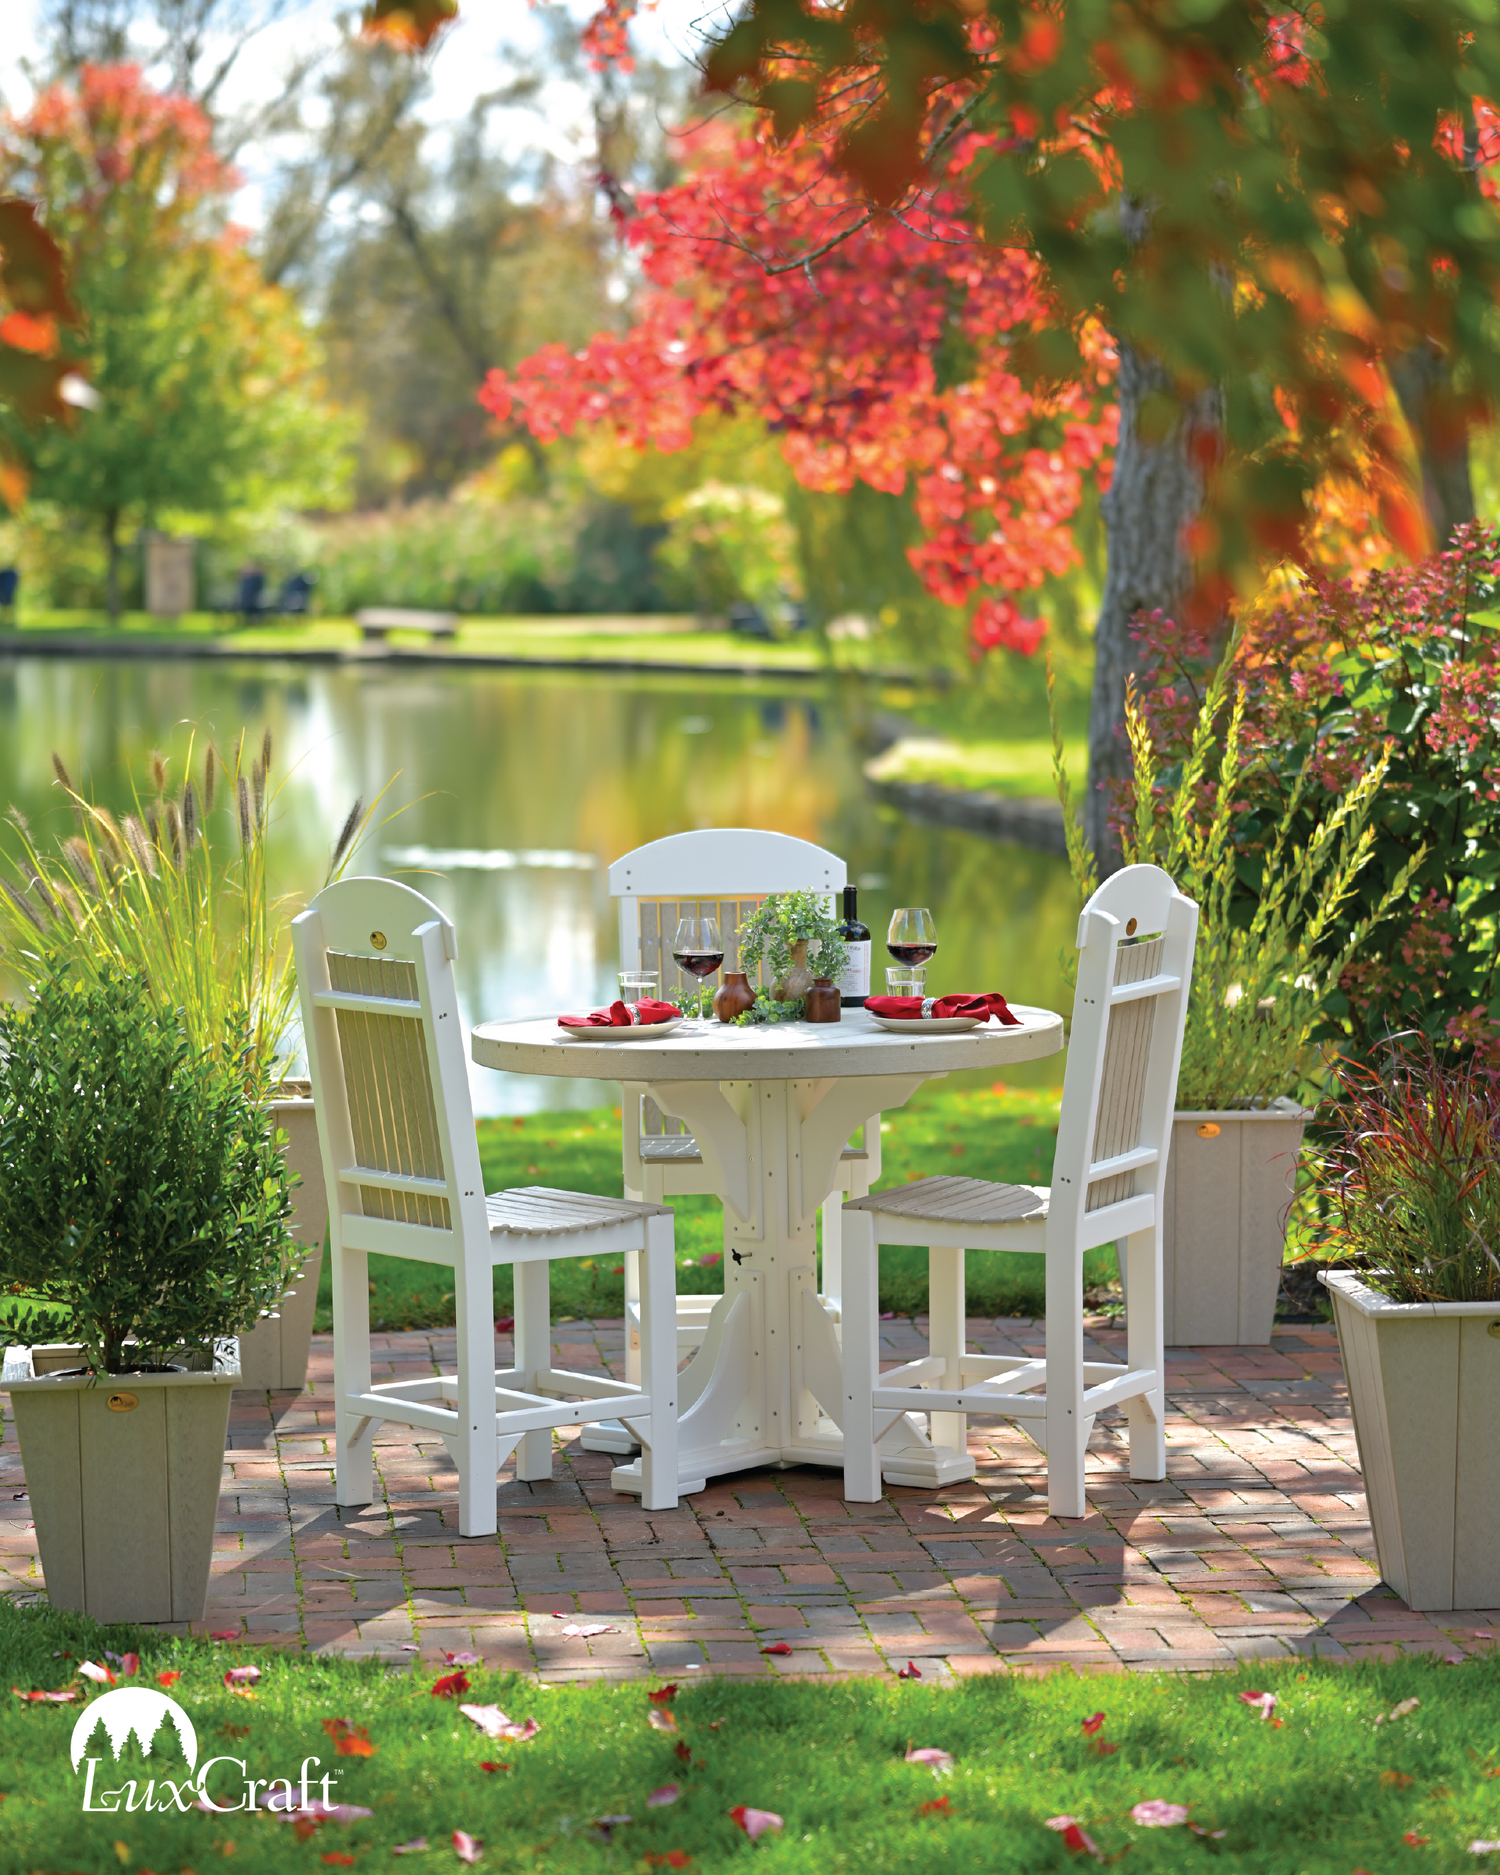 Best Selling Patio Furniture in United States